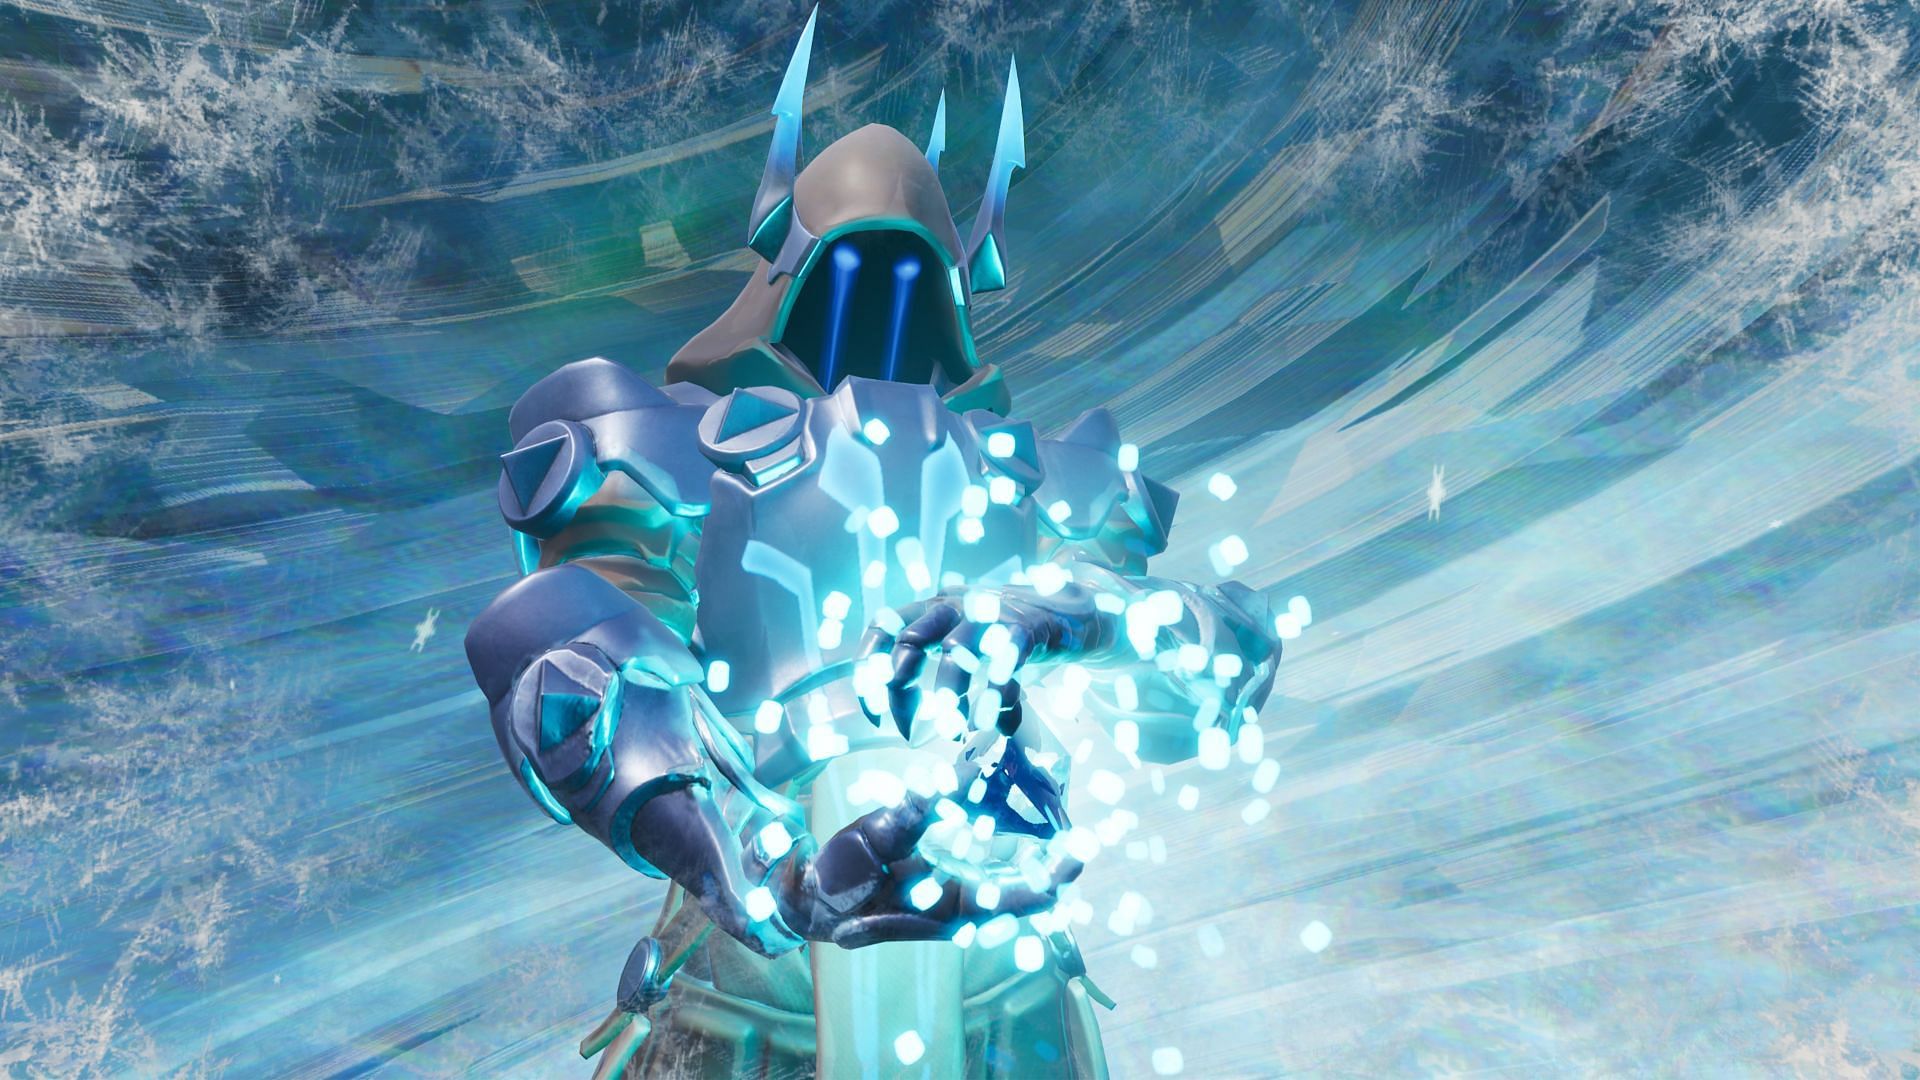 The Ice King has played a huge role in Fortnite lore (Image via Epic Games)